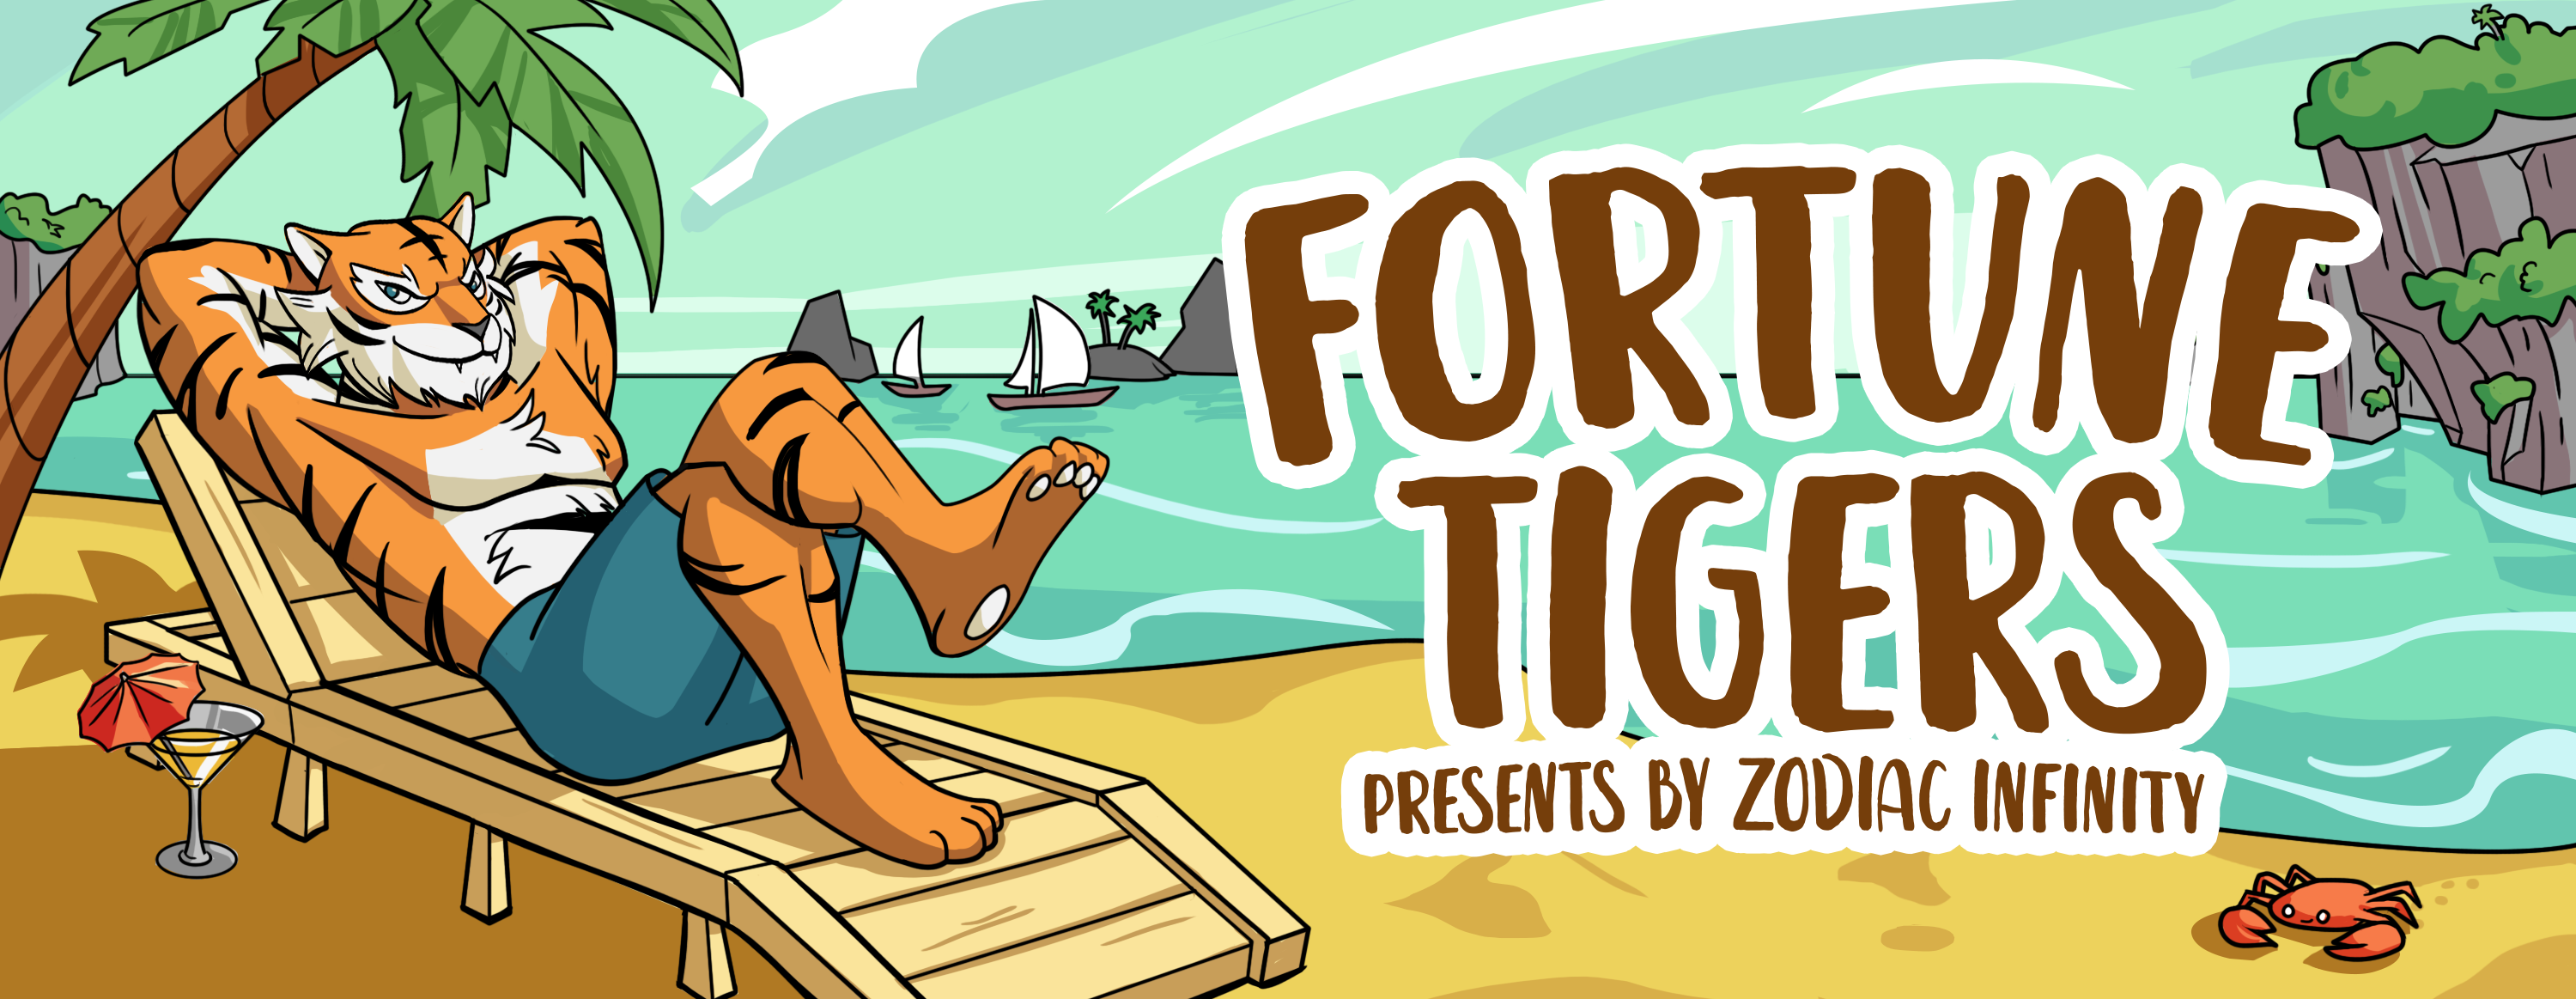 Fortune Tigers